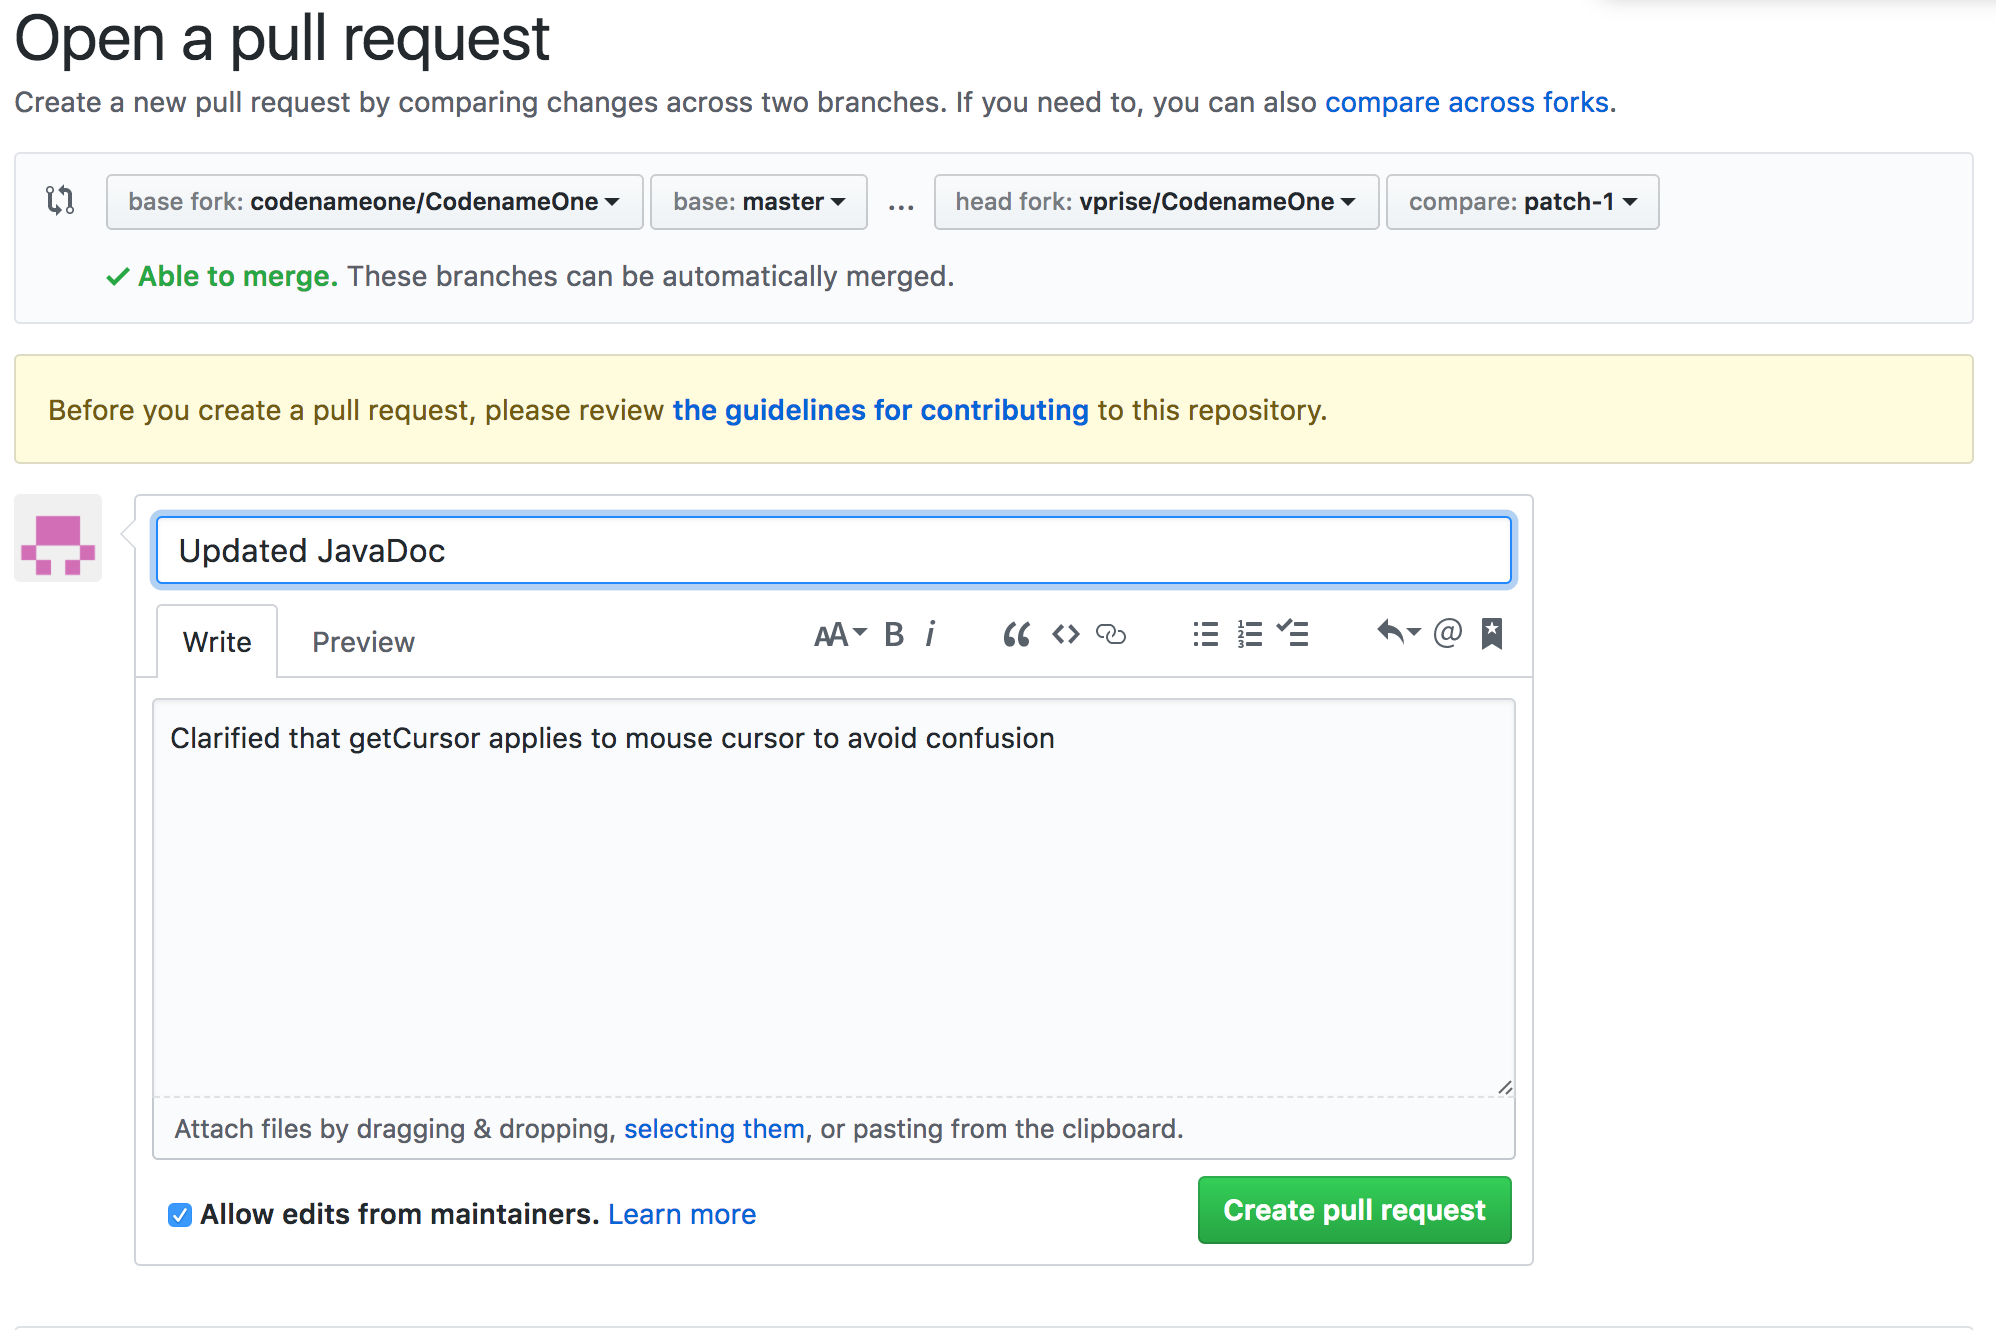 Second stage of pull request you can edit the submit comment